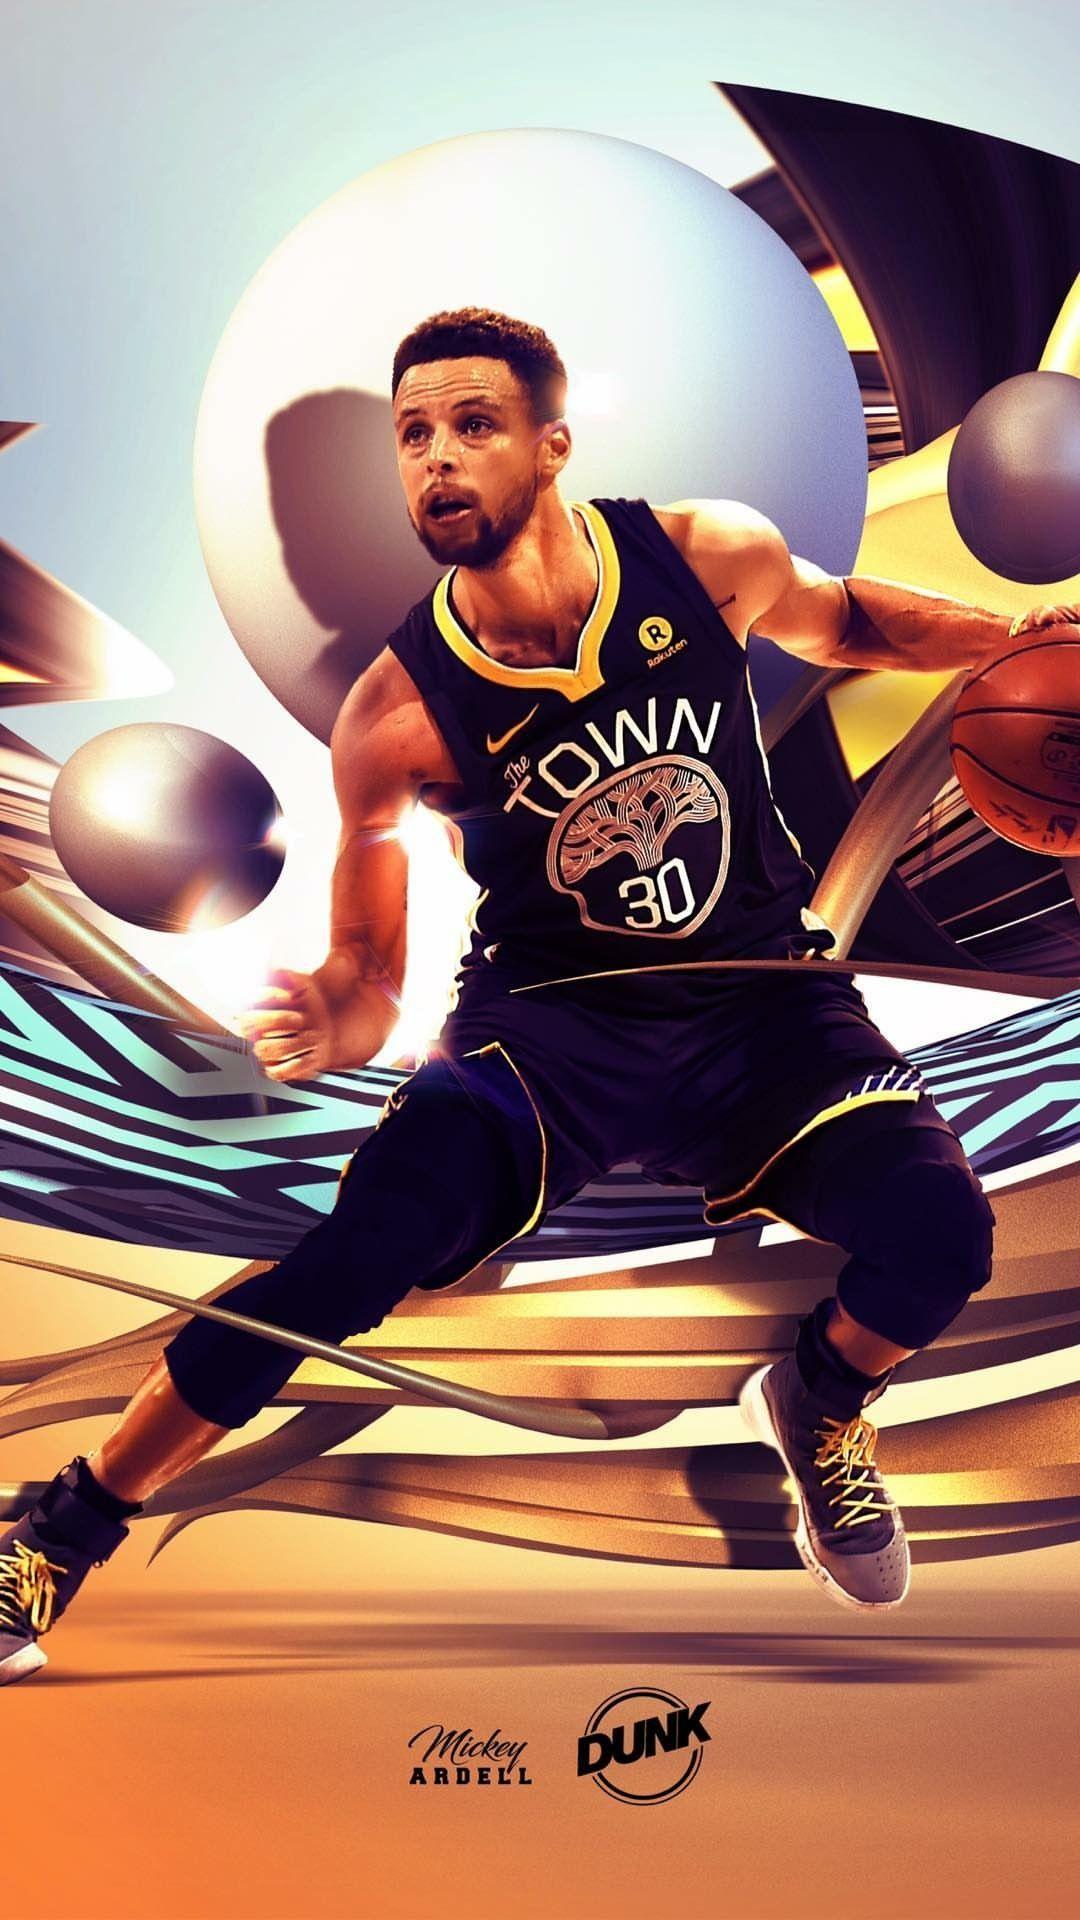 STEPHEN CURRY WALLPAPER. BASKETBALL. Stephen curry